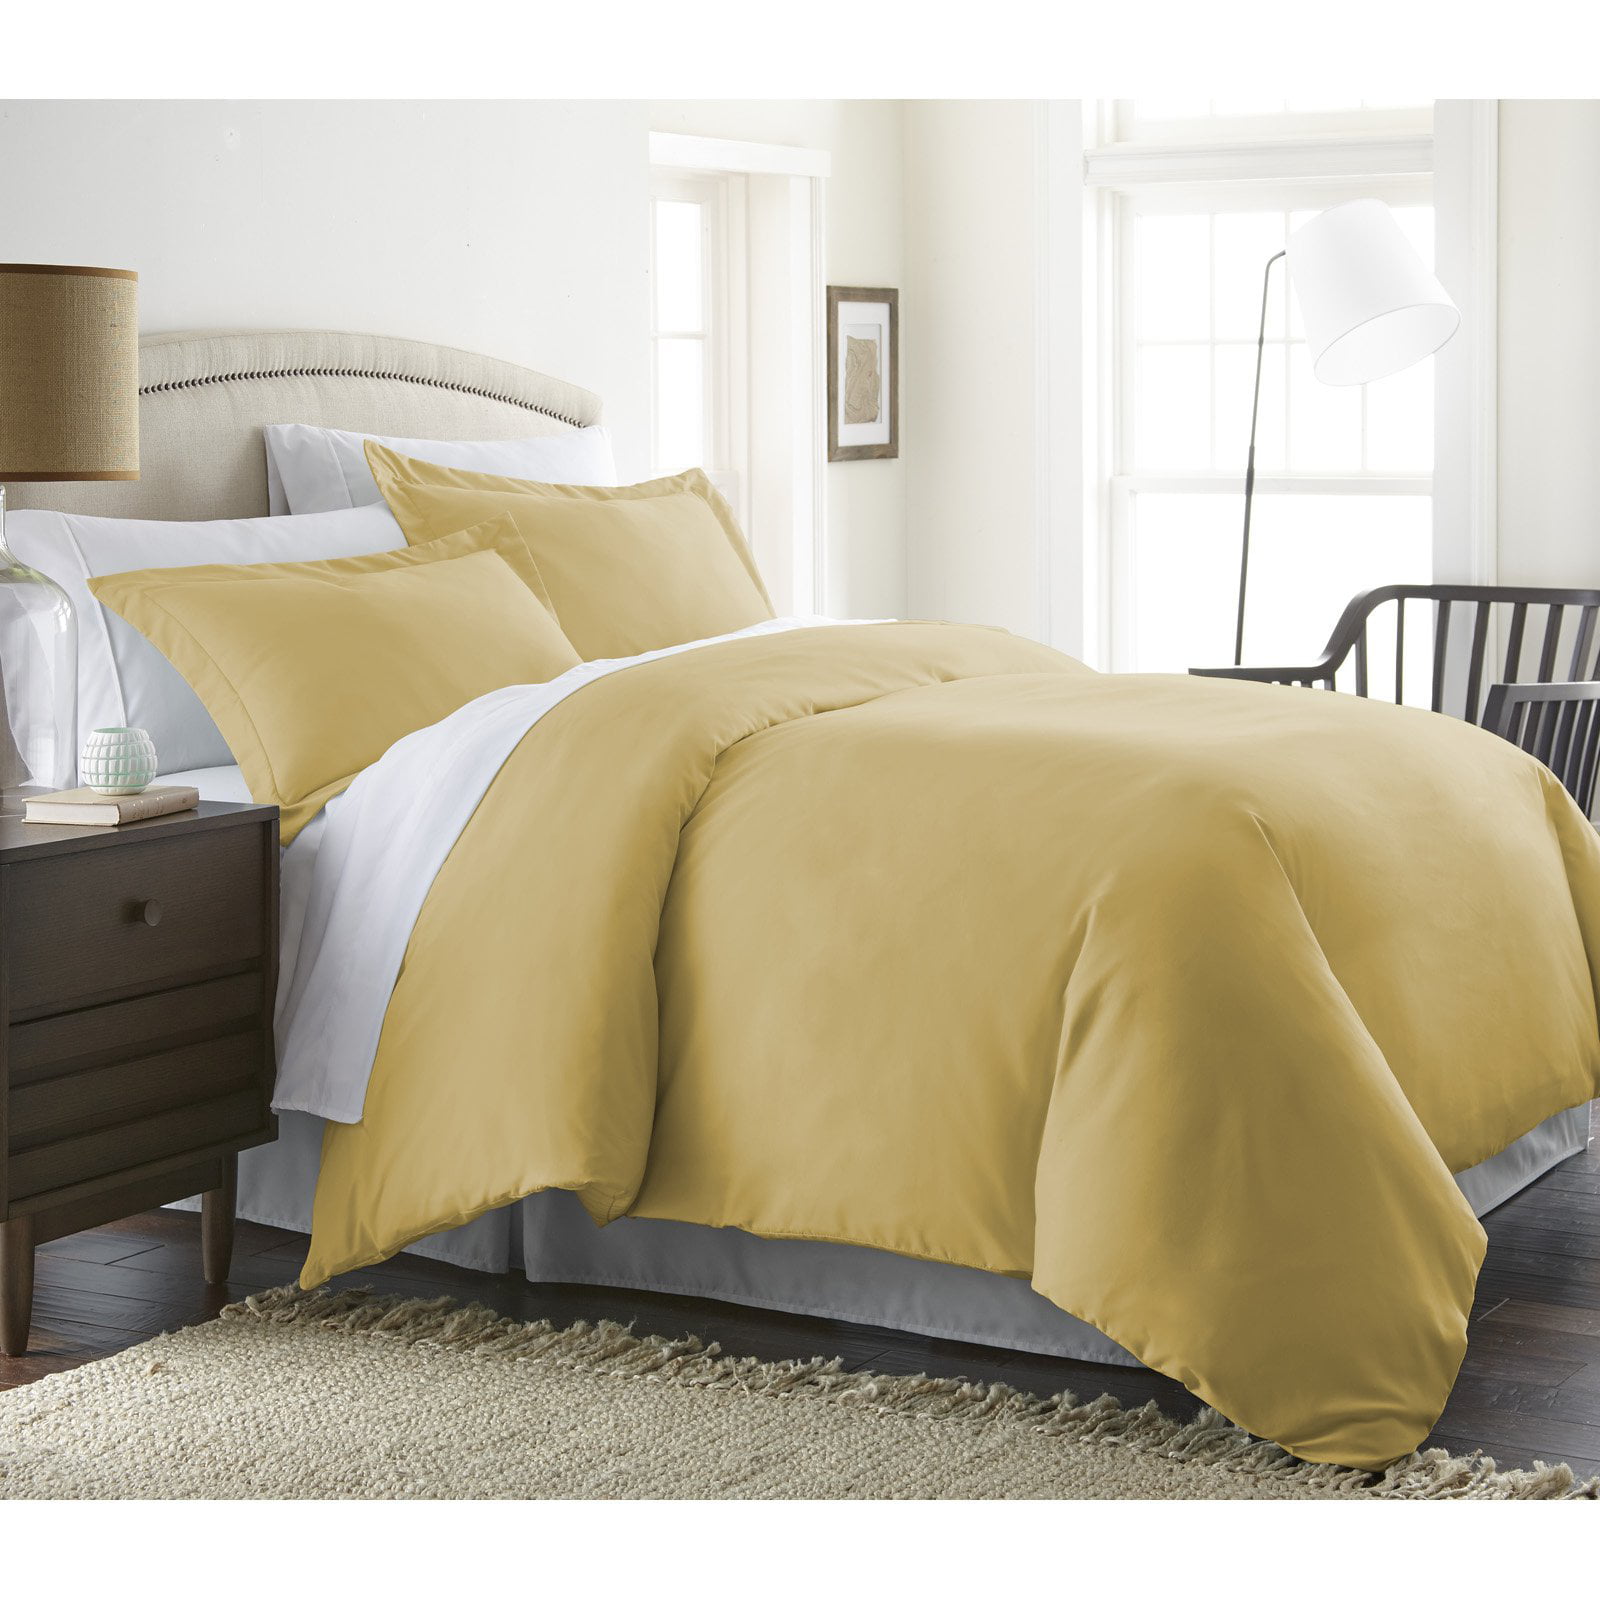 Beckham Luxury Soft Brushed 1800 Series, Jcpenney Twin Duvet Covers